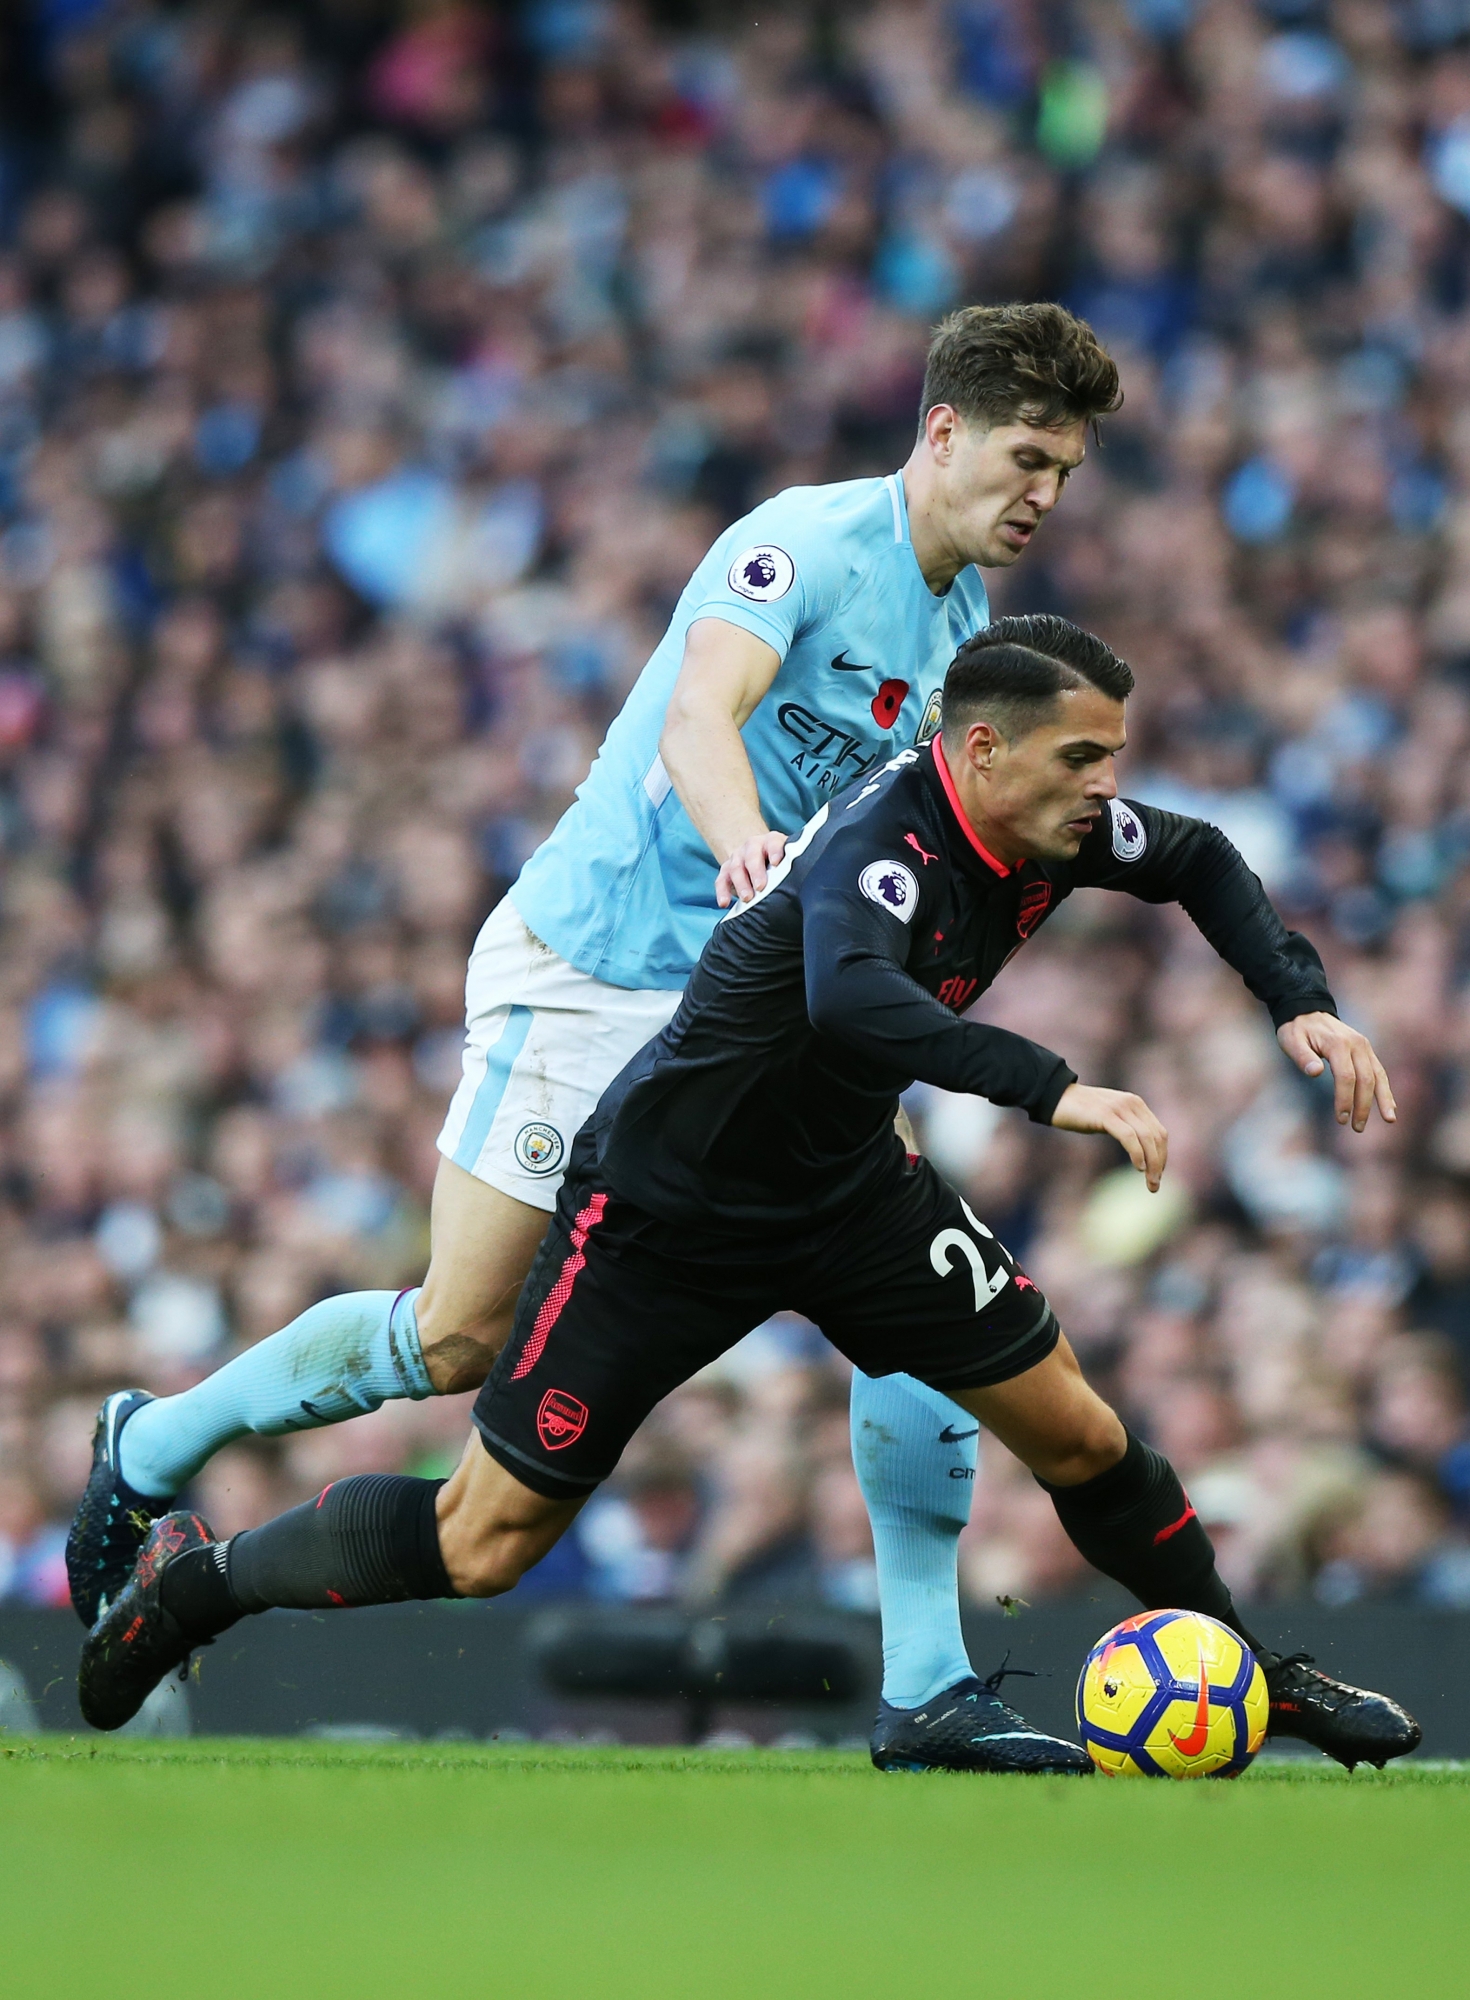 epa06310143 Granit Xhaka (R) of Arsenal in action against John Stones of Manchester City during the English Premier League match between Manchester City and Arsenal at the Etihad Stadium in Manchester, Britain, 05 November 2017.  EPA/NIGEL RODDIS No use with unauthorised audio, video, data, fixture lists, club/league logos 'live' services. Online in-match use limited to 75 images, no video emulation. No use in betting, games or single club/league/player publications.  EDITORIAL USE ONLY BRITAIN SOCCER ENGLISH PREMIER LEAGUE